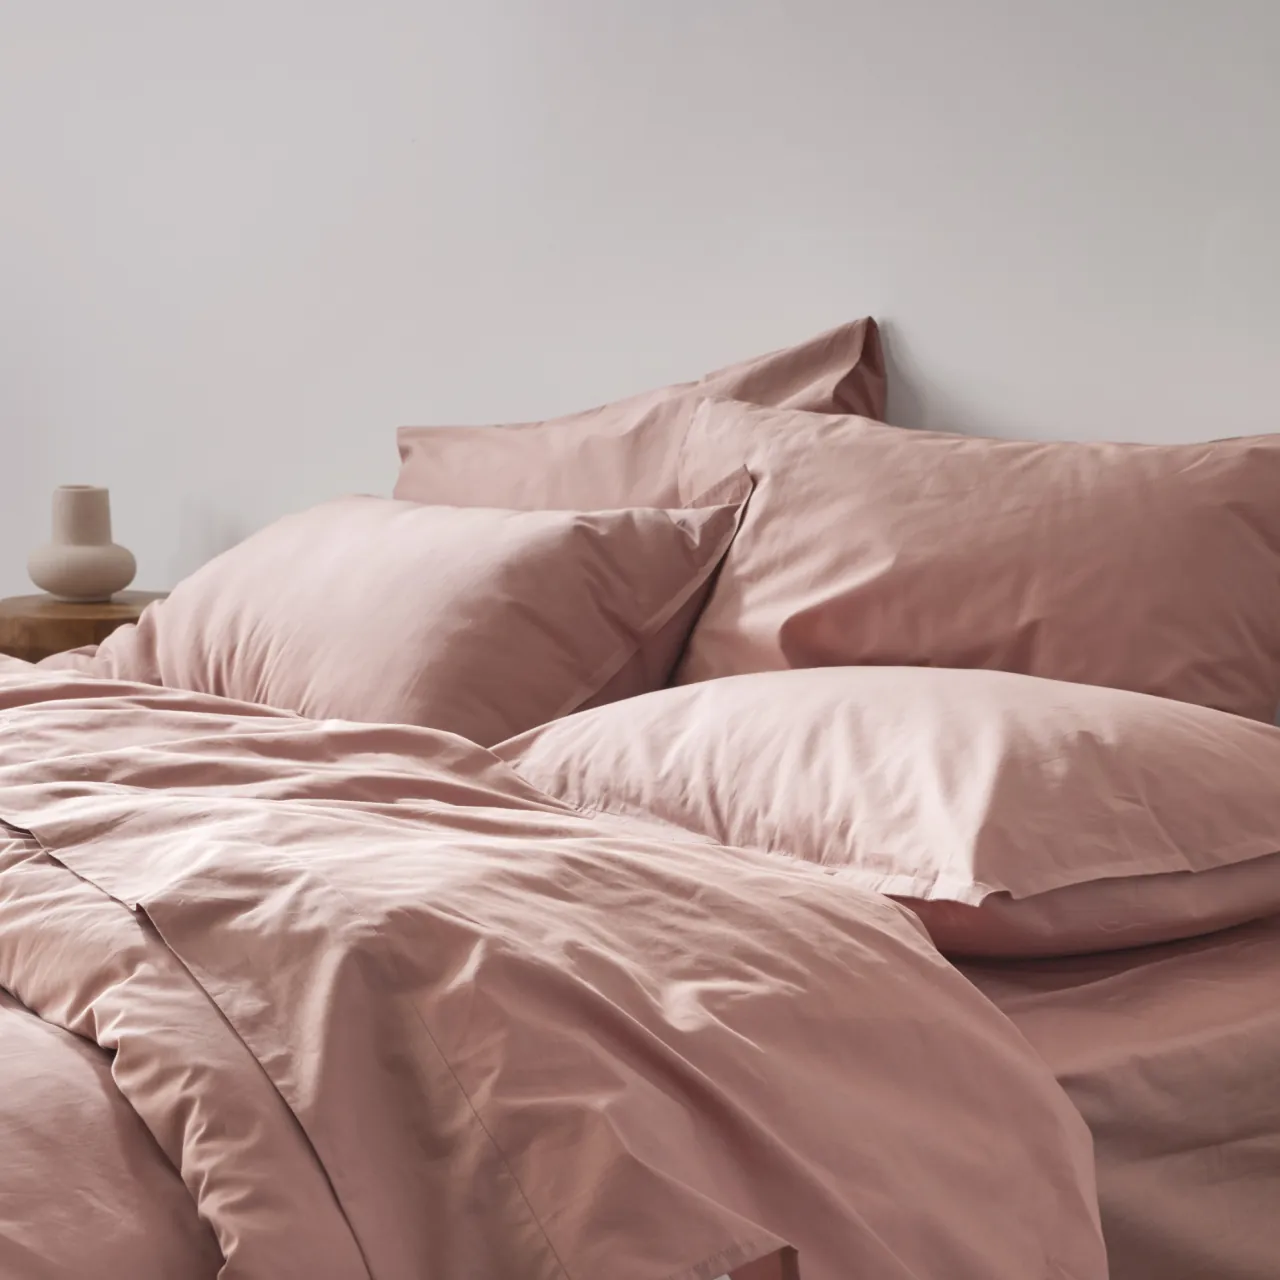 Silk And Snow Percale Bed Sheet Review